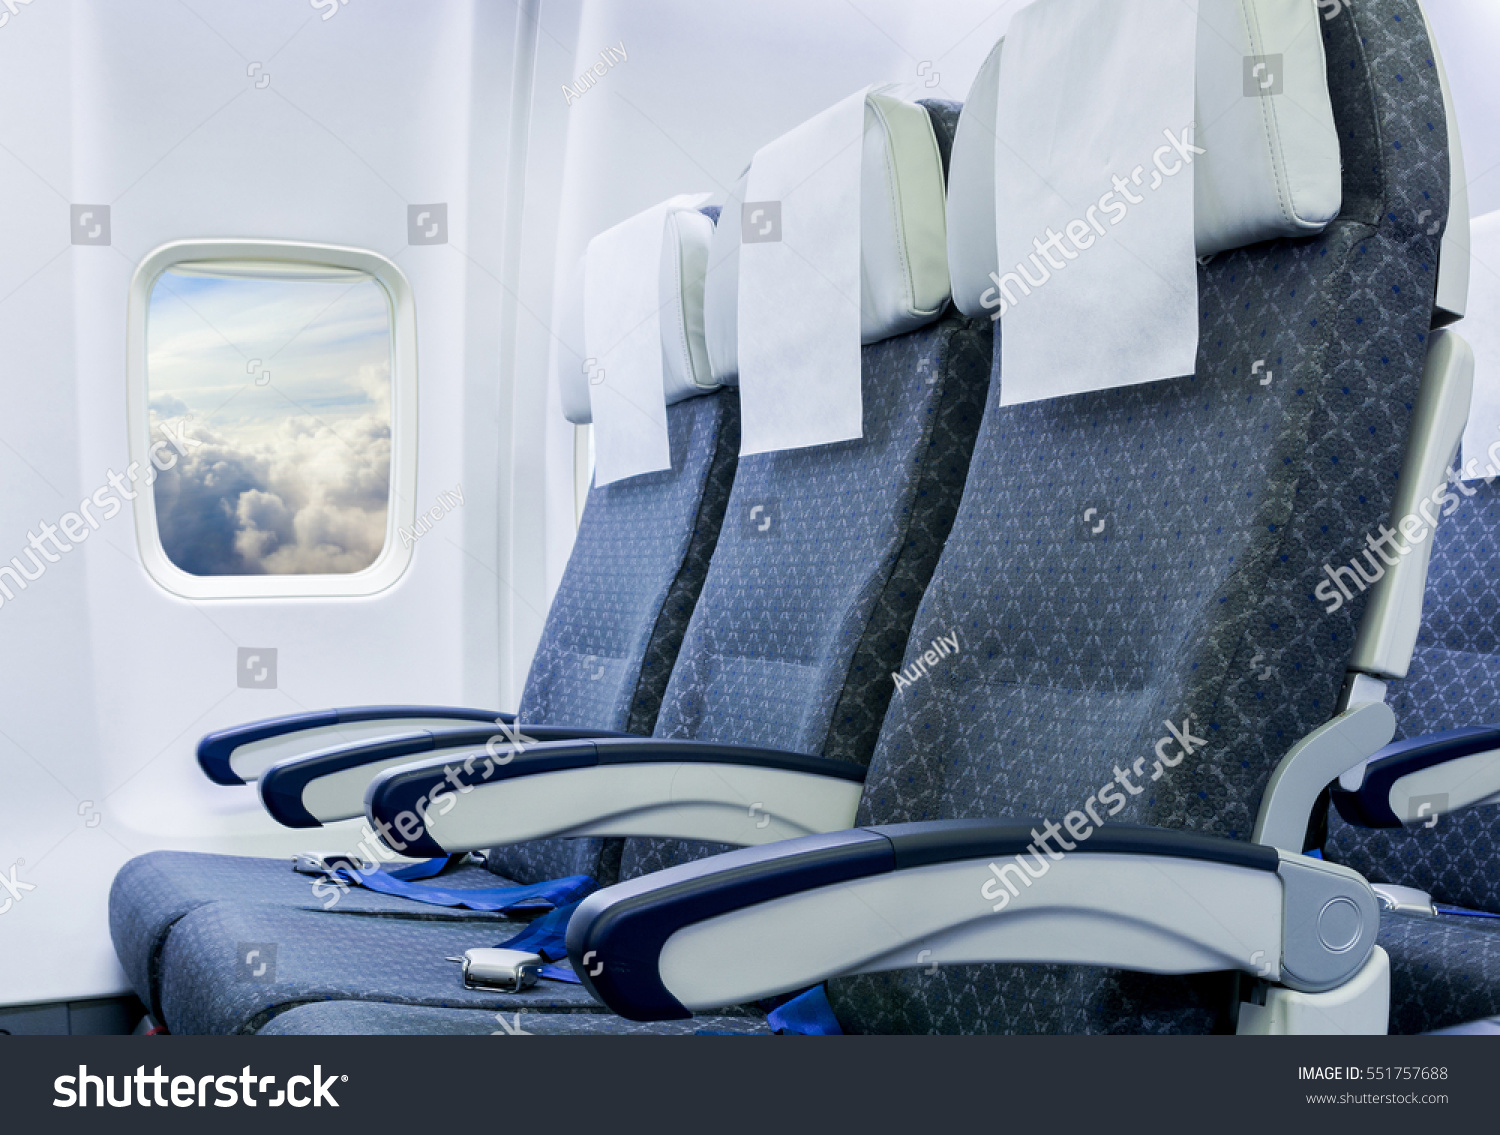 Airplane seats in the cabin economy class #551757688